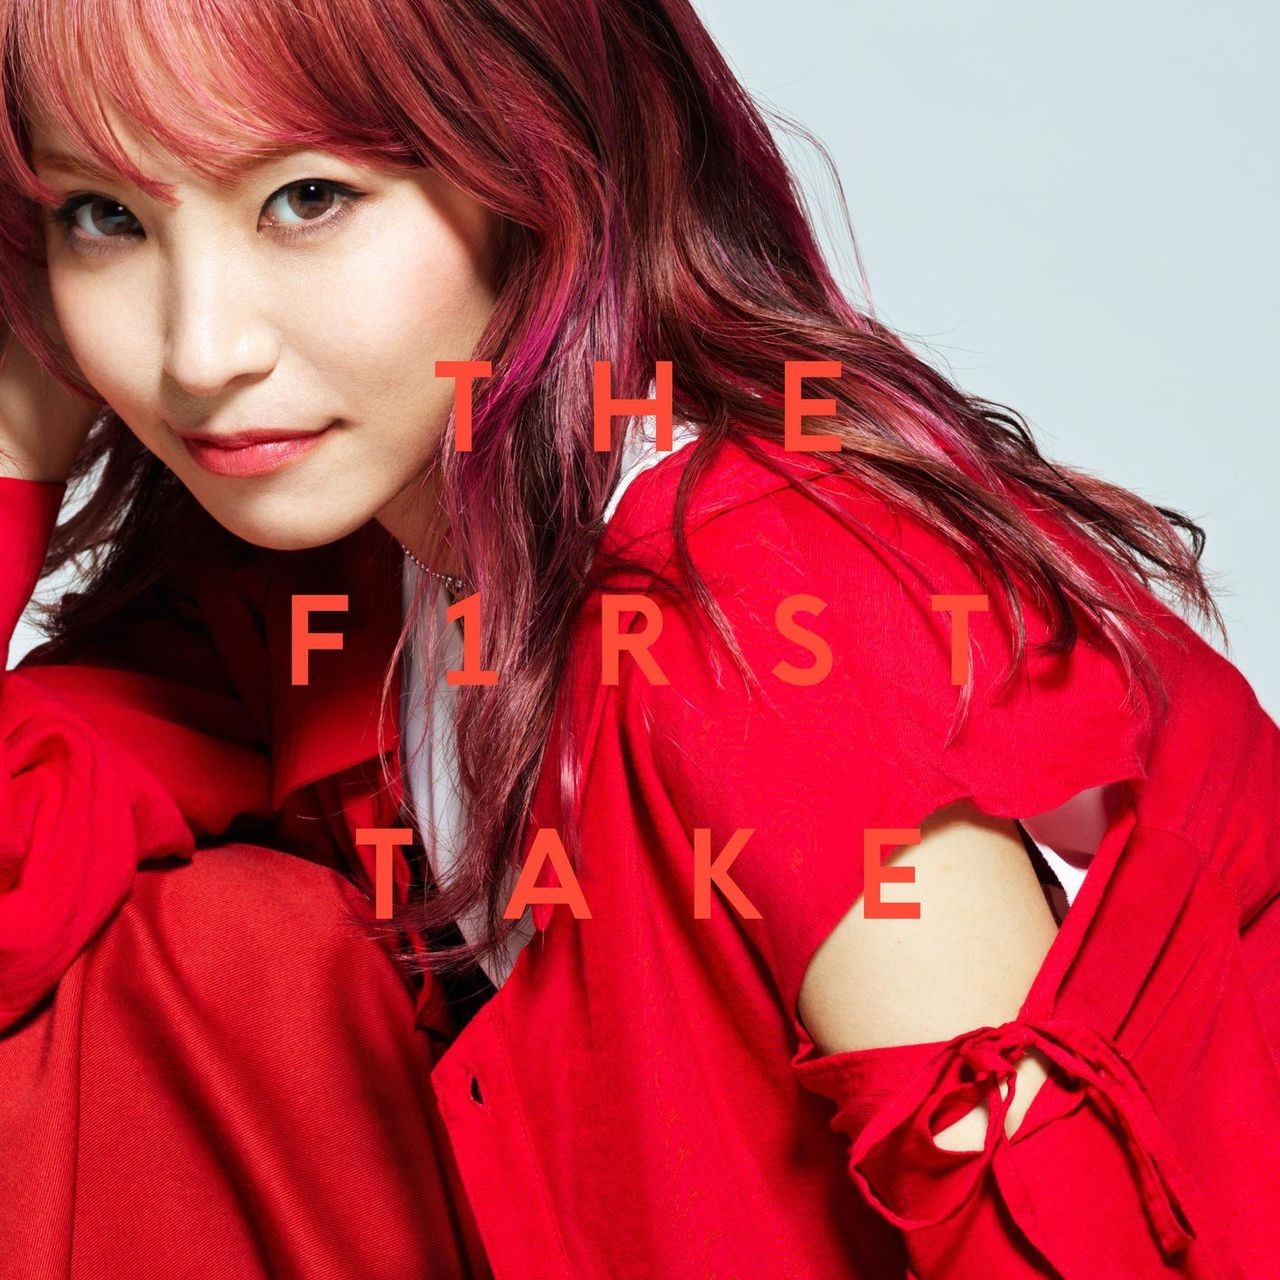 LiSA - 紅蓮華 - From THE FIRST TAKE (2020-12-25) [FLAC 24bit/96kHz]